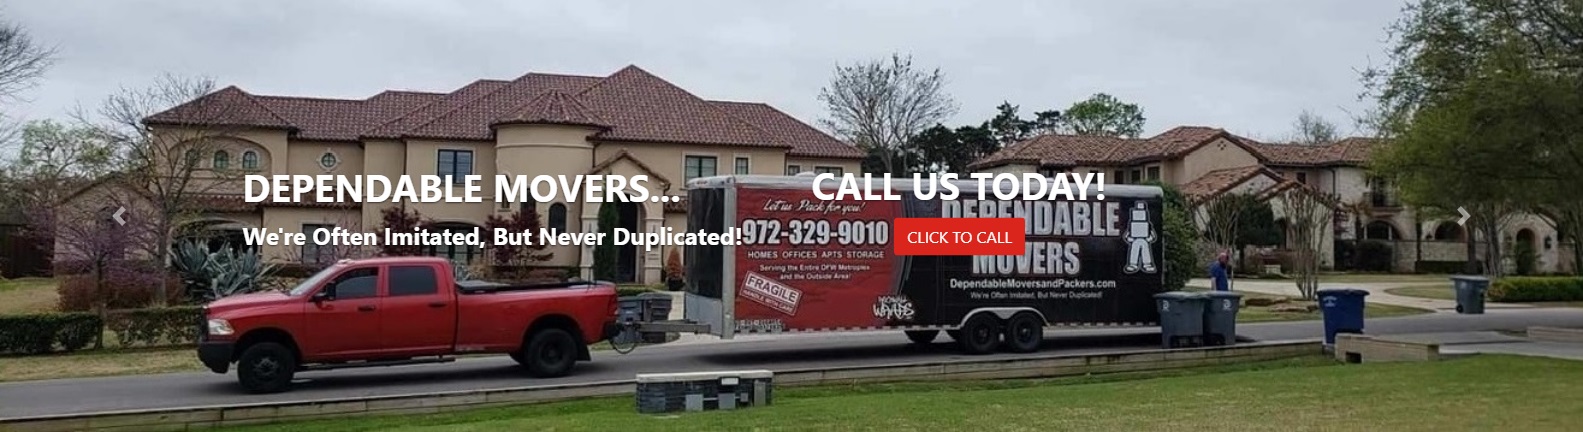 Dependable Movers Allen Mover Allen Moving Company - Home Office Apartment Movers Residential Commercial Movers in Allen Texas